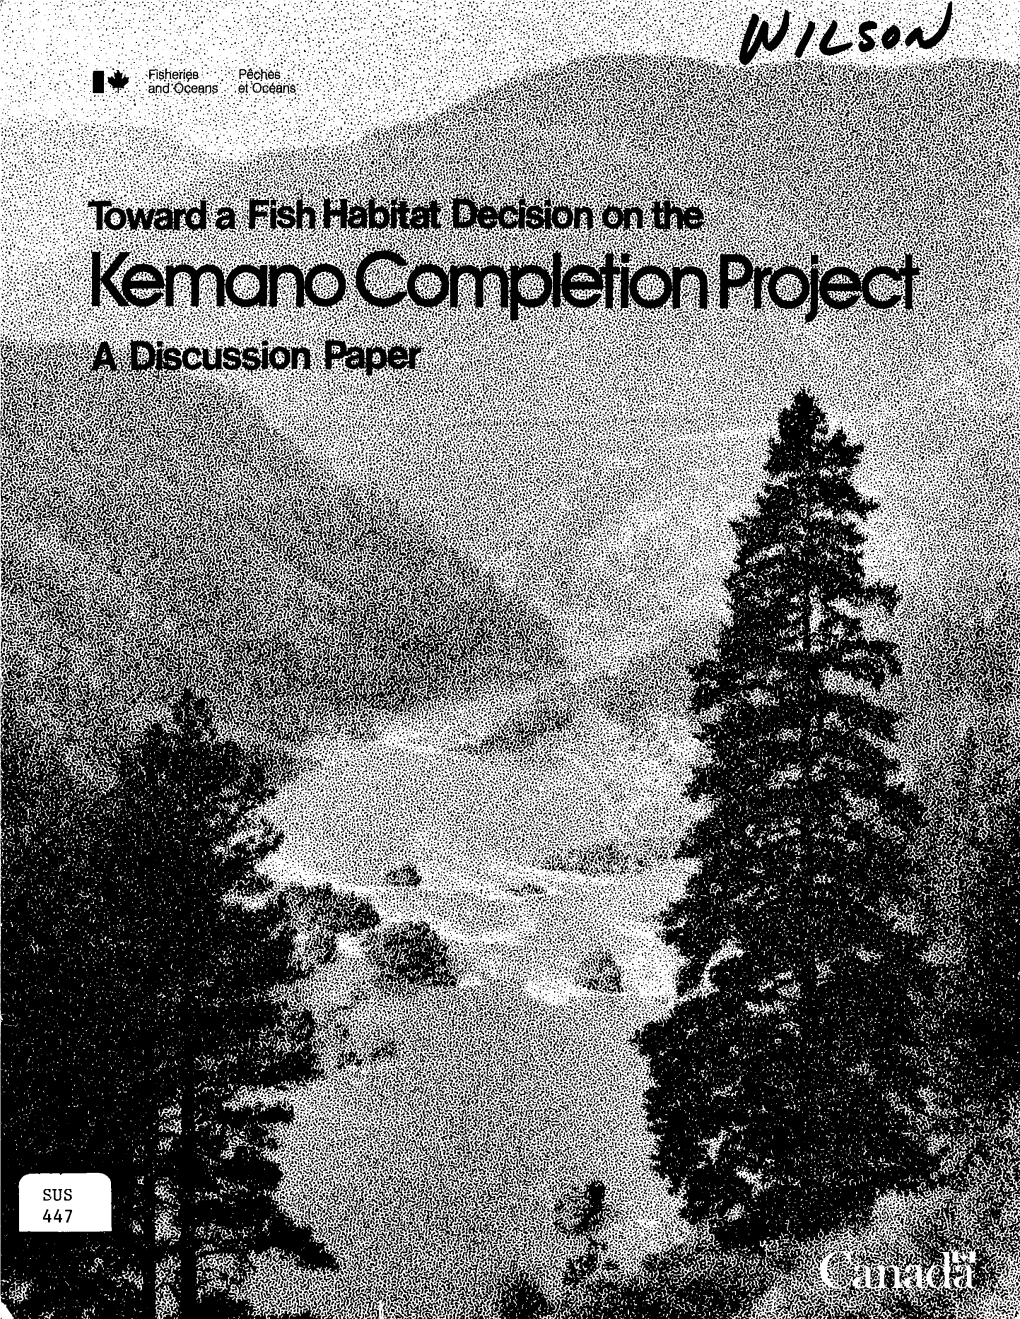 I,:R~;;;;{,R~Ckr Toward a Fish Habitat Decision on the Kemano Completion Project a Discussion Paper